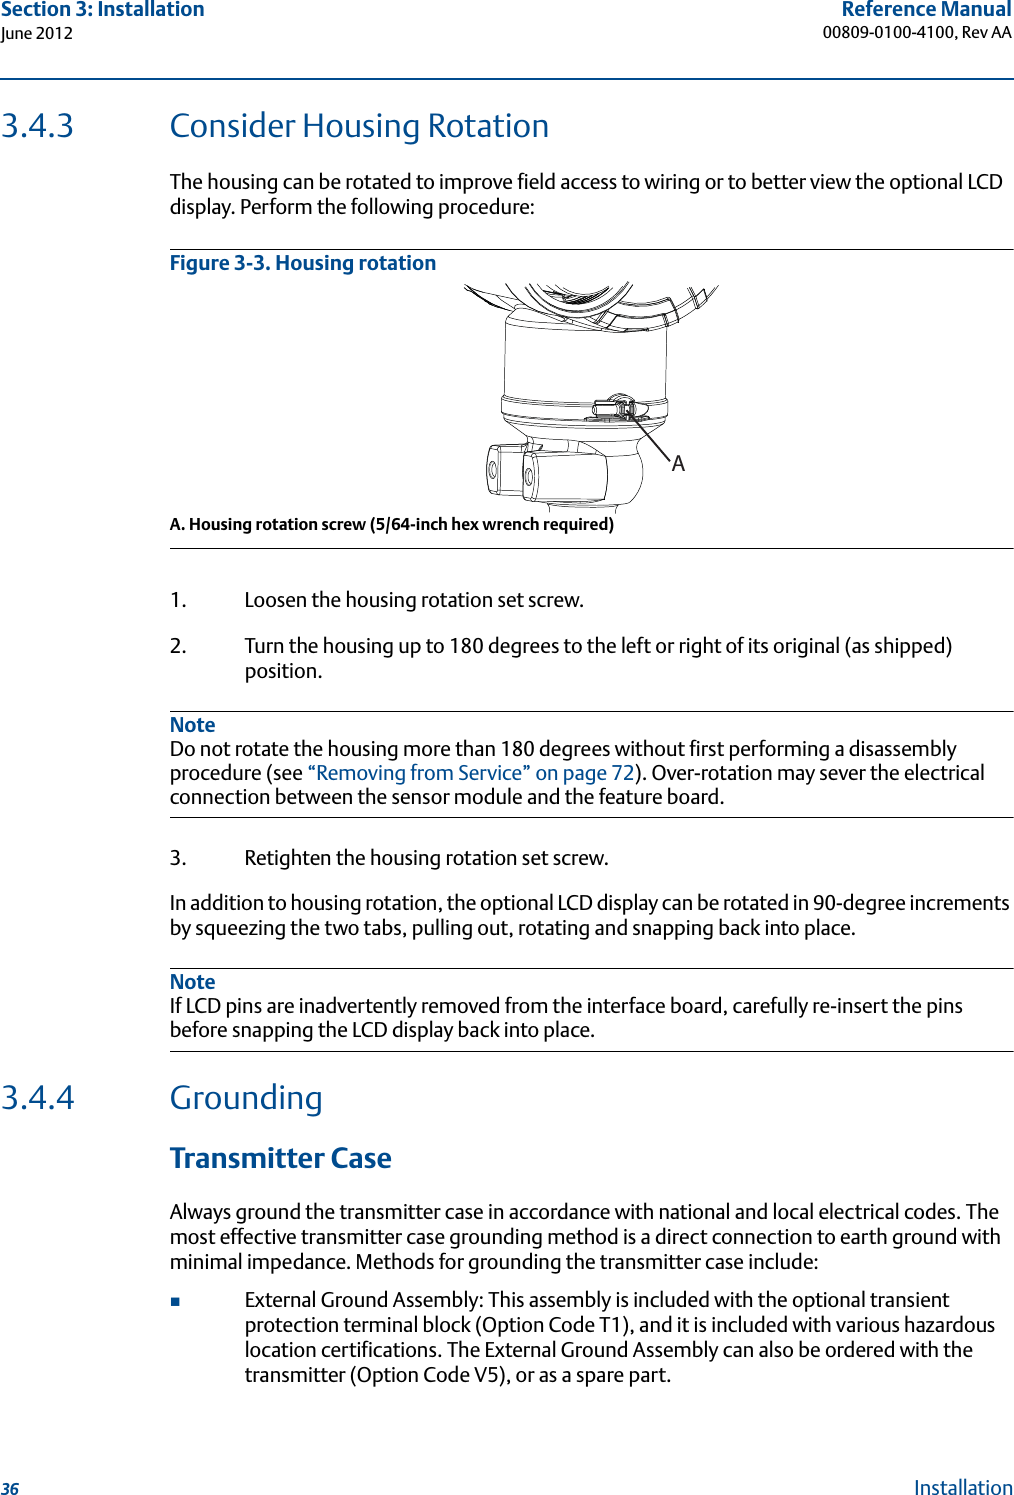 36Reference Manual00809-0100-4100, Rev AASection 3: InstallationJune 2012Installation3.4.3 Consider Housing RotationThe housing can be rotated to improve field access to wiring or to better view the optional LCD display. Perform the following procedure:Figure 3-3. Housing rotationA. Housing rotation screw (5/64-inch hex wrench required)1. Loosen the housing rotation set screw.2. Turn the housing up to 180 degrees to the left or right of its original (as shipped) position. NoteDo not rotate the housing more than 180 degrees without first performing a disassembly procedure (see “Removing from Service” on page 72). Over-rotation may sever the electrical connection between the sensor module and the feature board.3. Retighten the housing rotation set screw.In addition to housing rotation, the optional LCD display can be rotated in 90-degree increments by squeezing the two tabs, pulling out, rotating and snapping back into place.NoteIf LCD pins are inadvertently removed from the interface board, carefully re-insert the pins before snapping the LCD display back into place.3.4.4 Grounding Transmitter CaseAlways ground the transmitter case in accordance with national and local electrical codes. The most effective transmitter case grounding method is a direct connection to earth ground with minimal impedance. Methods for grounding the transmitter case include:External Ground Assembly: This assembly is included with the optional transient protection terminal block (Option Code T1), and it is included with various hazardous location certifications. The External Ground Assembly can also be ordered with the transmitter (Option Code V5), or as a spare part.A